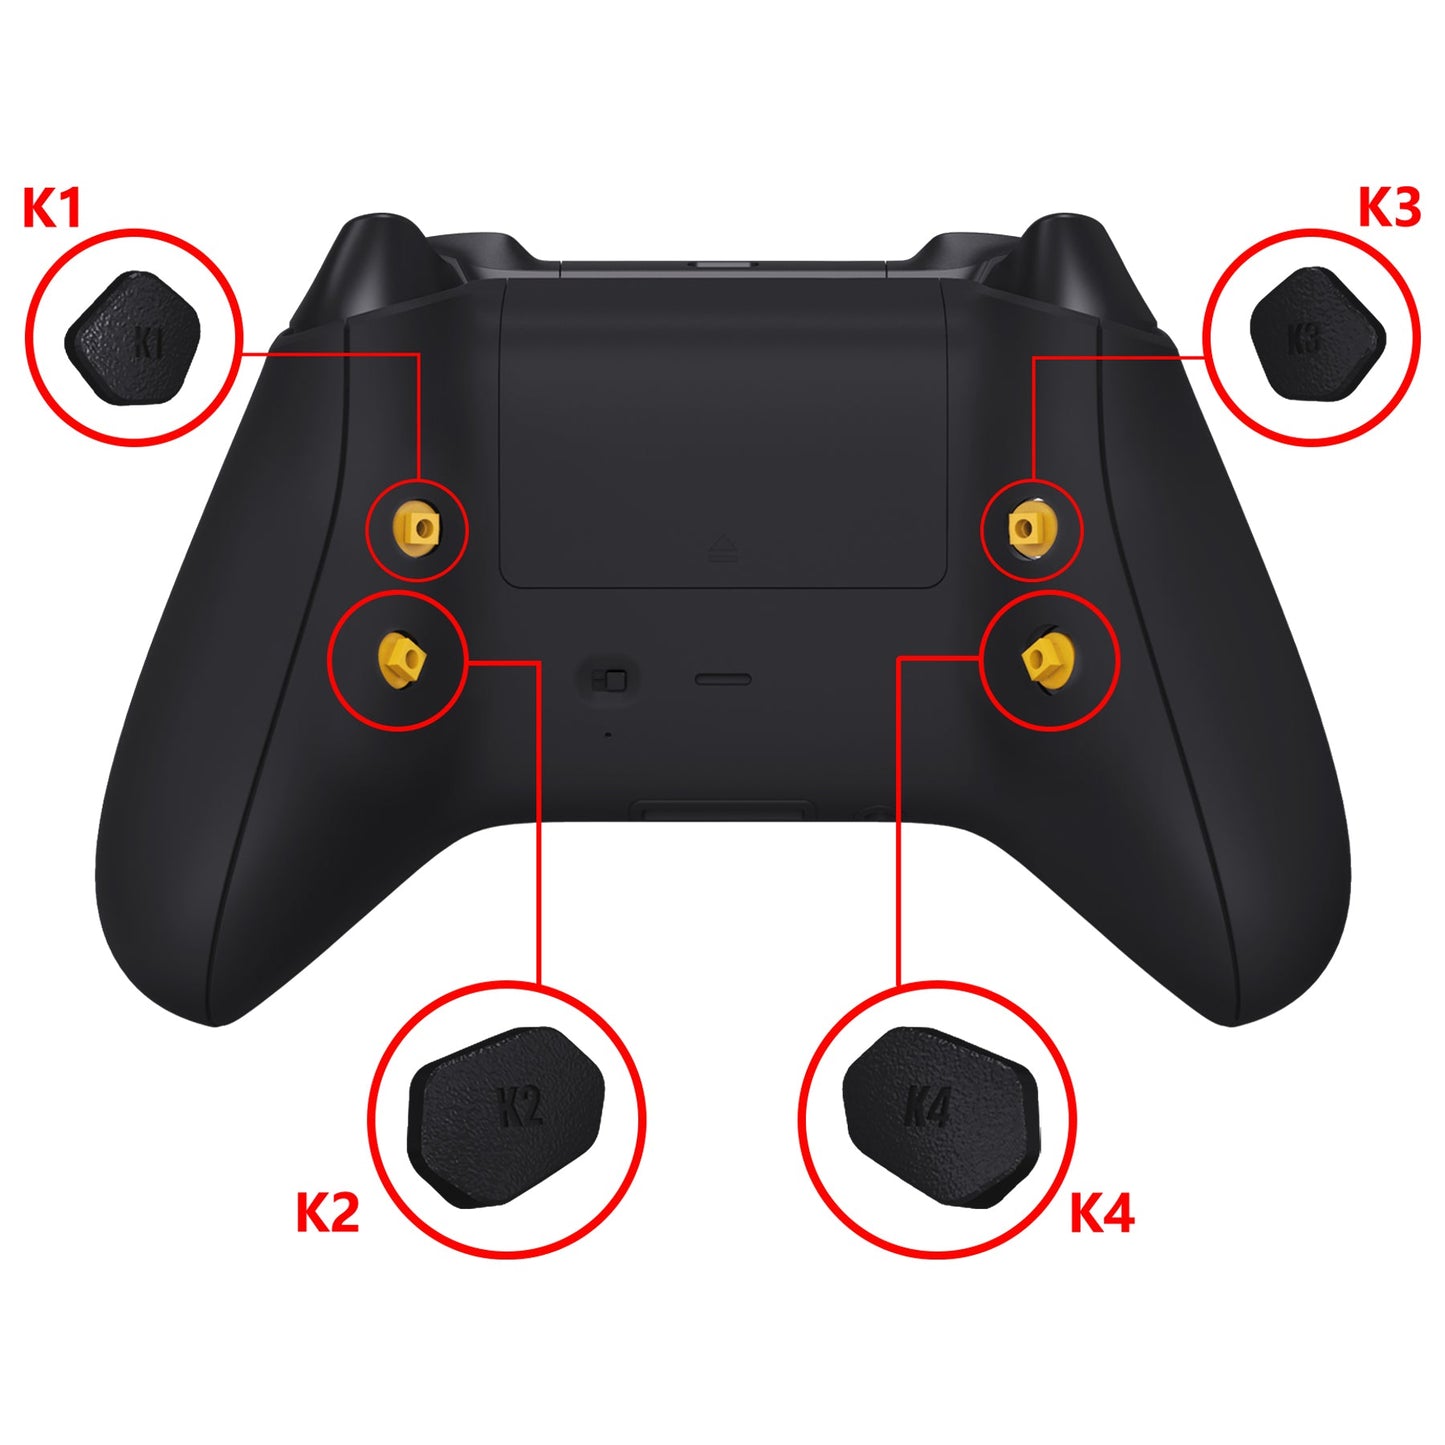 eXtremeRate Retail Black Replacement Redesigned K1 K2 K3 K4 Back Buttons Paddles & Toggle Switch for Xbox Series X/S Controller eXtremerate Hope Remap Kit - Controller & Hope Remap Board NOT Included - DX3P3009